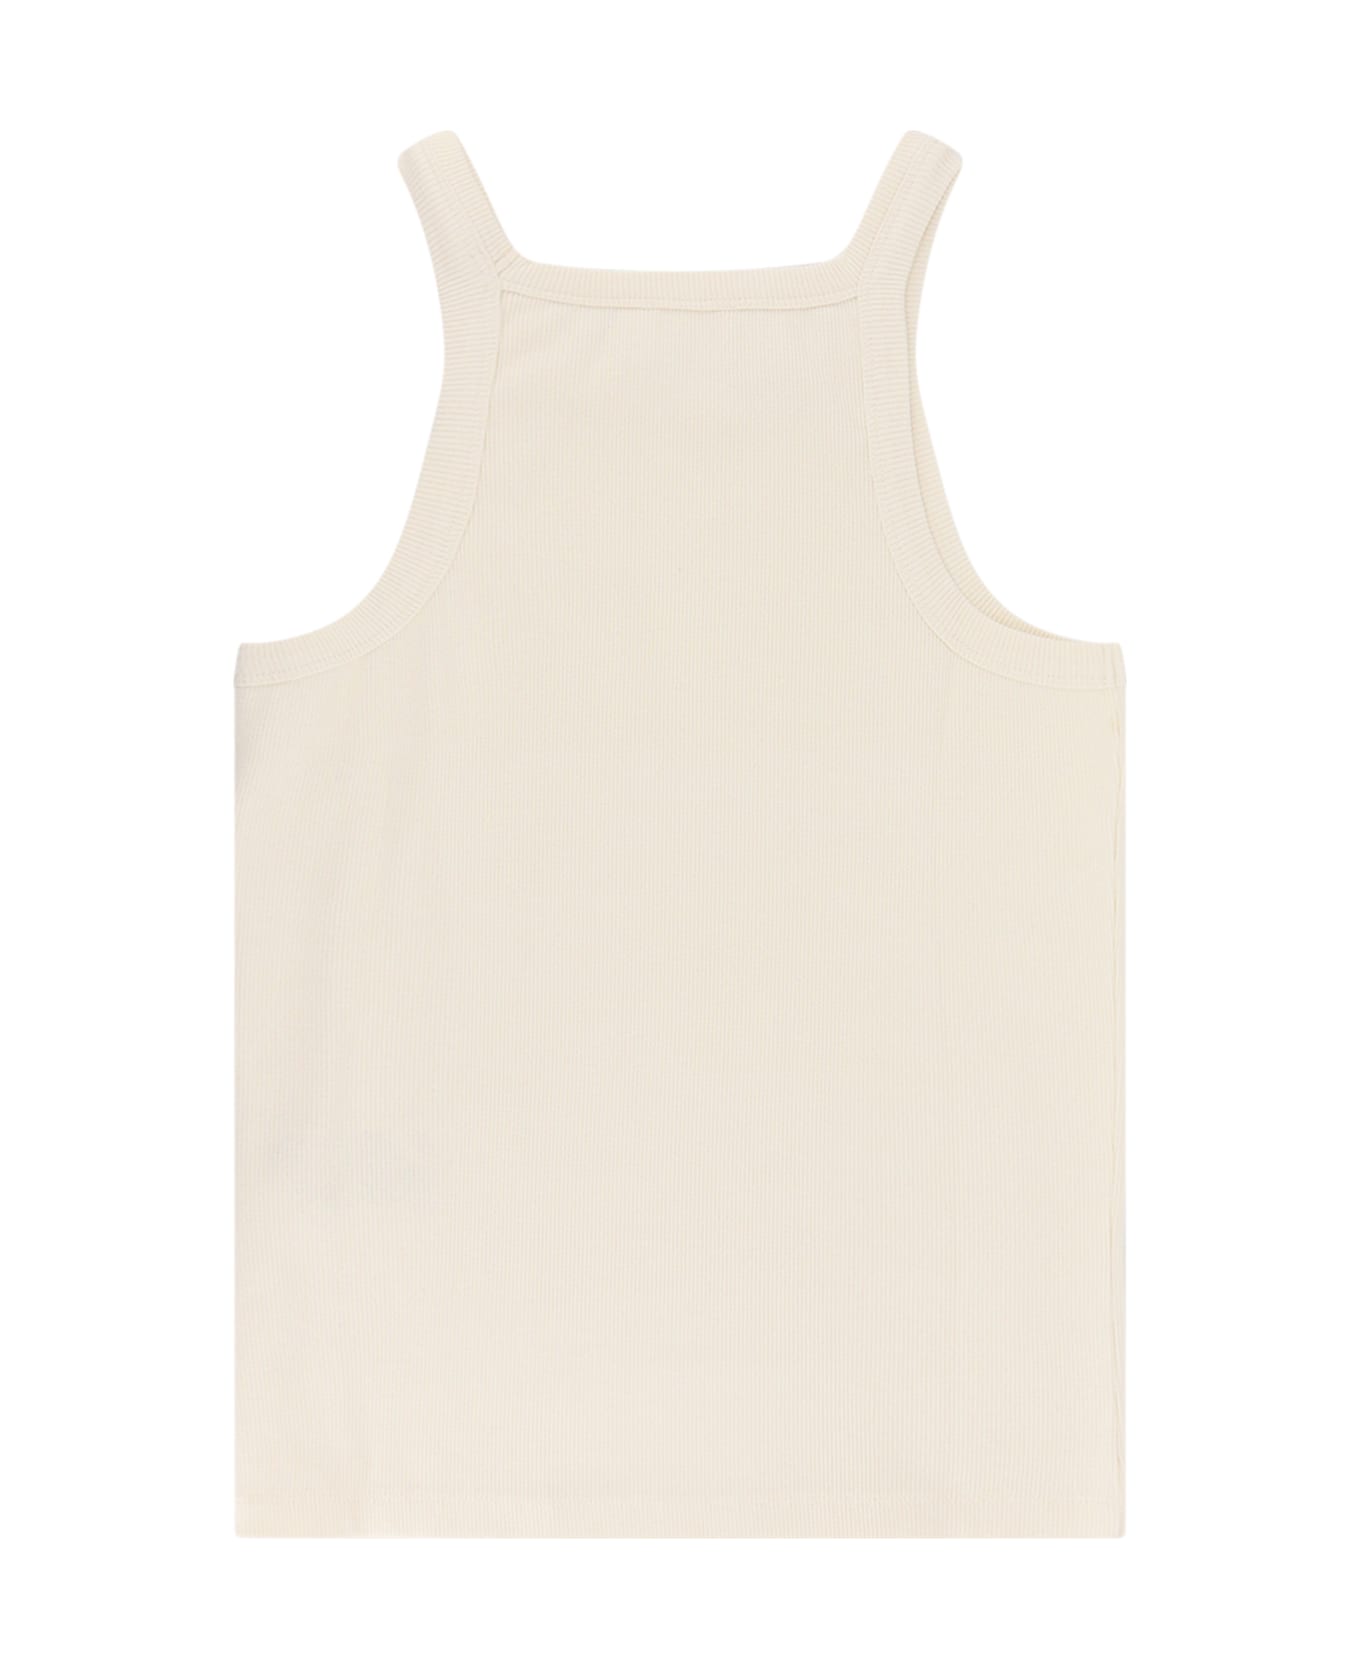 Closed Tank Top - Ivory